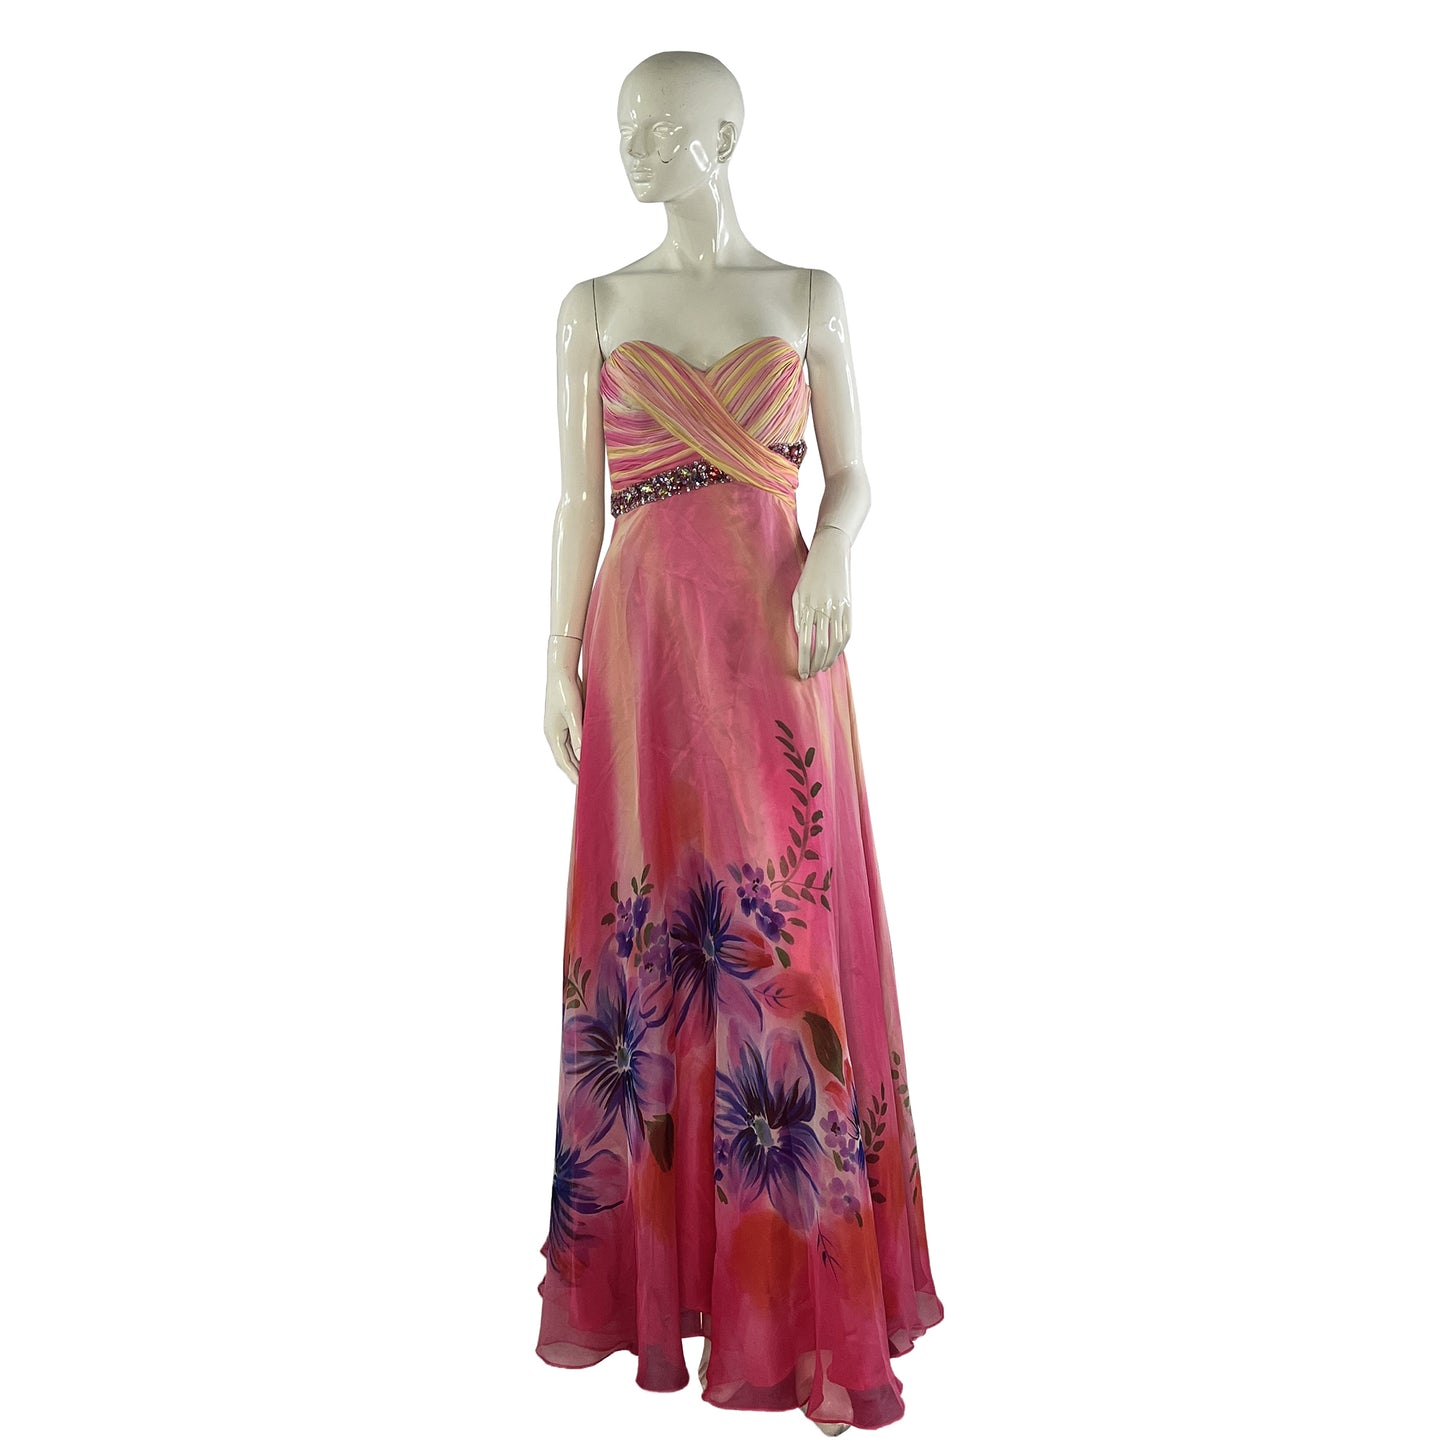 Iris Gown Strapless Embellished Floral Pink, Yellow, Purple Size 6 SKU 000369-5